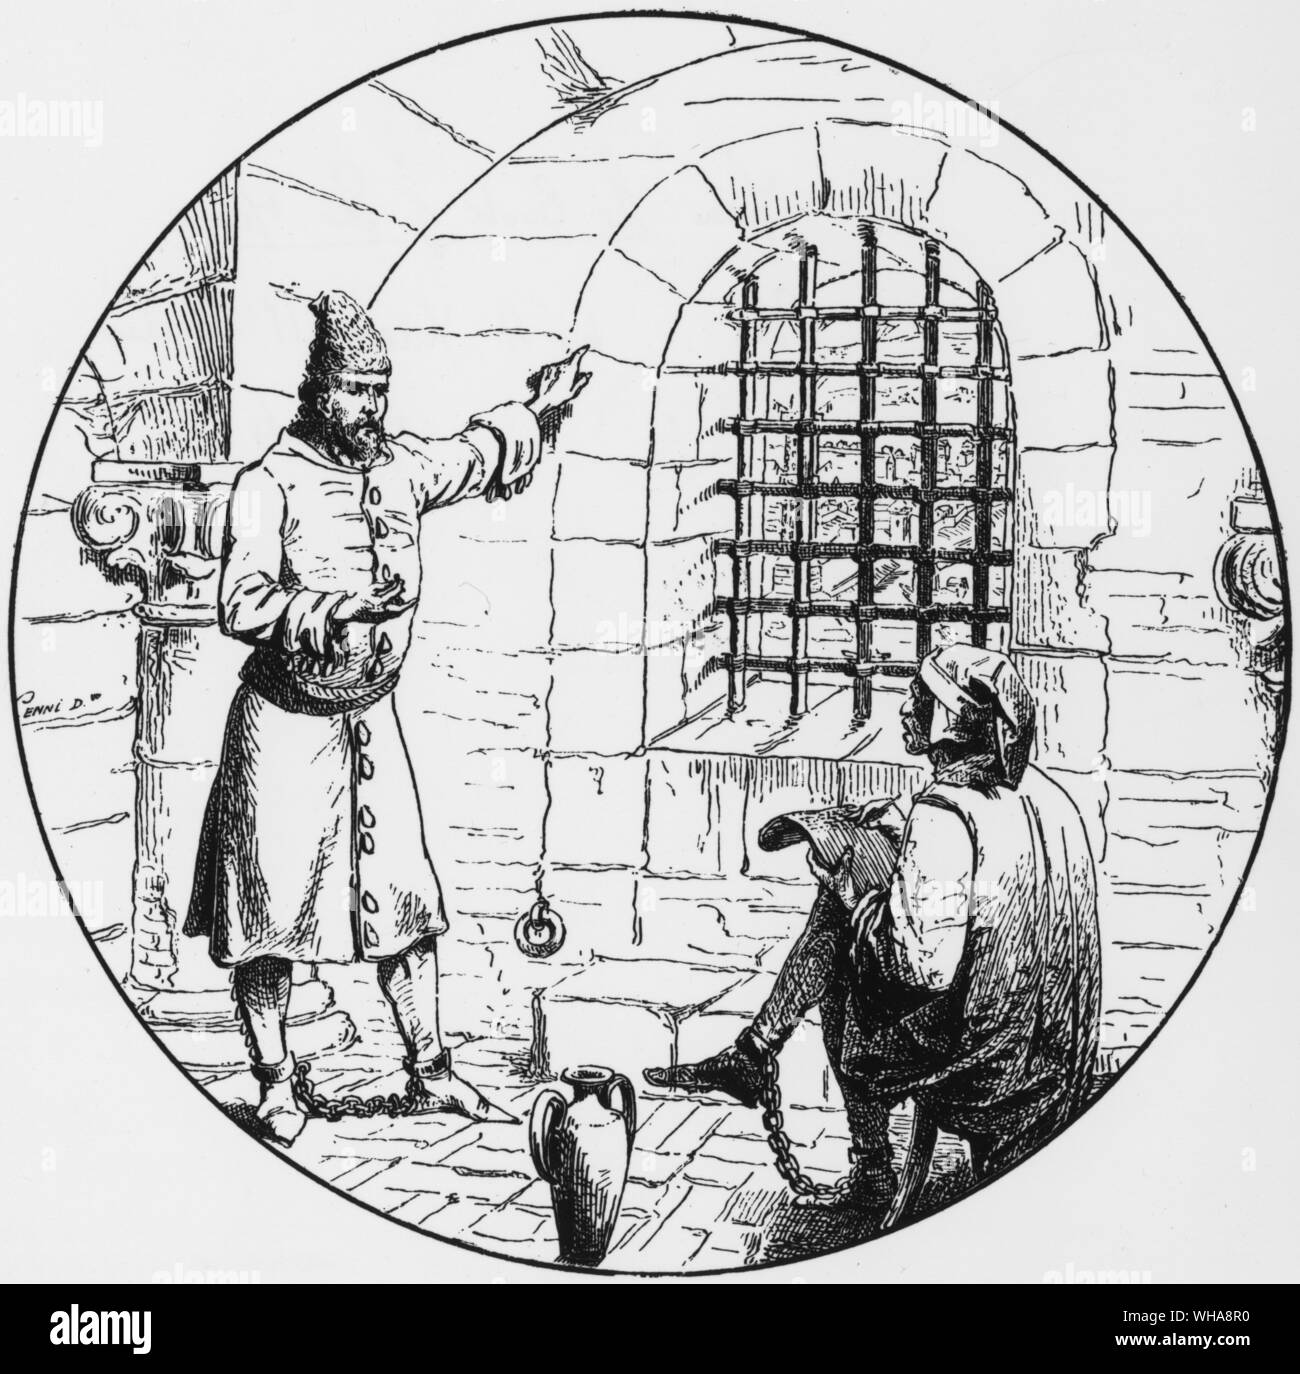 Marco Polo in the prison of Genoa. Marco served in several high-level government positions, including as ambassador and as the governor of the city of Yangzhou. While the Great Khan enjoyed having the Polos as his subjects and diplomats, Khan eventually consented to allow them to leave the Empire, as long as they would escort a princess who was scheduled to wed a Persian king.. The three Polos left the Empire in 1292 with the princess, a fleet of fourteen large boats, and 600 other passengers from a port in southern China. The armada sailed through Indonesia to Sri Lanka and India and onto Stock Photo